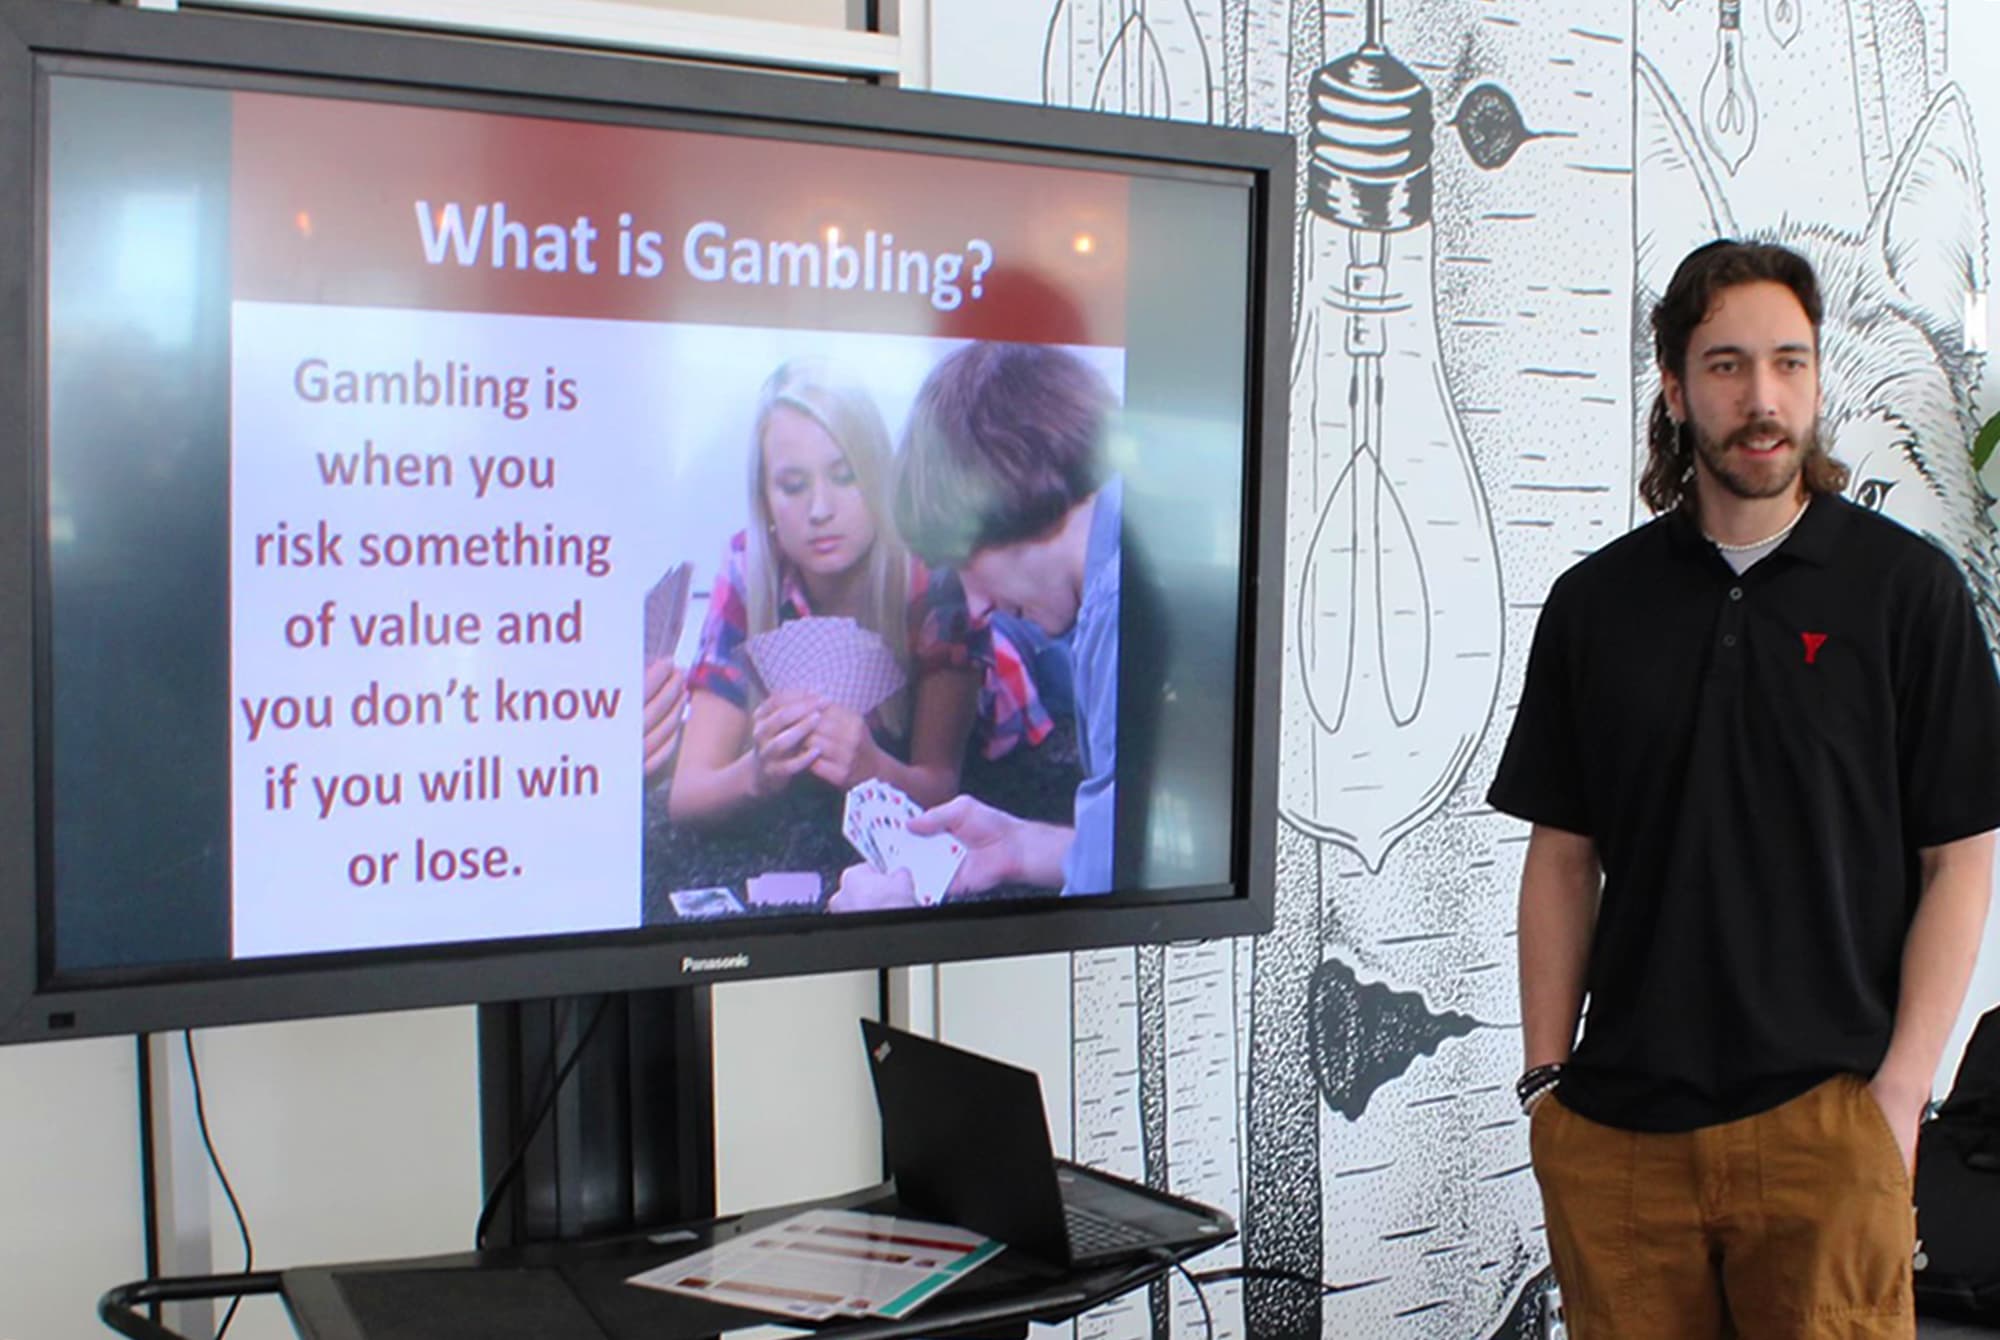 Nick Renaud speaks during the Gambling & Stigma event at the AC hub.